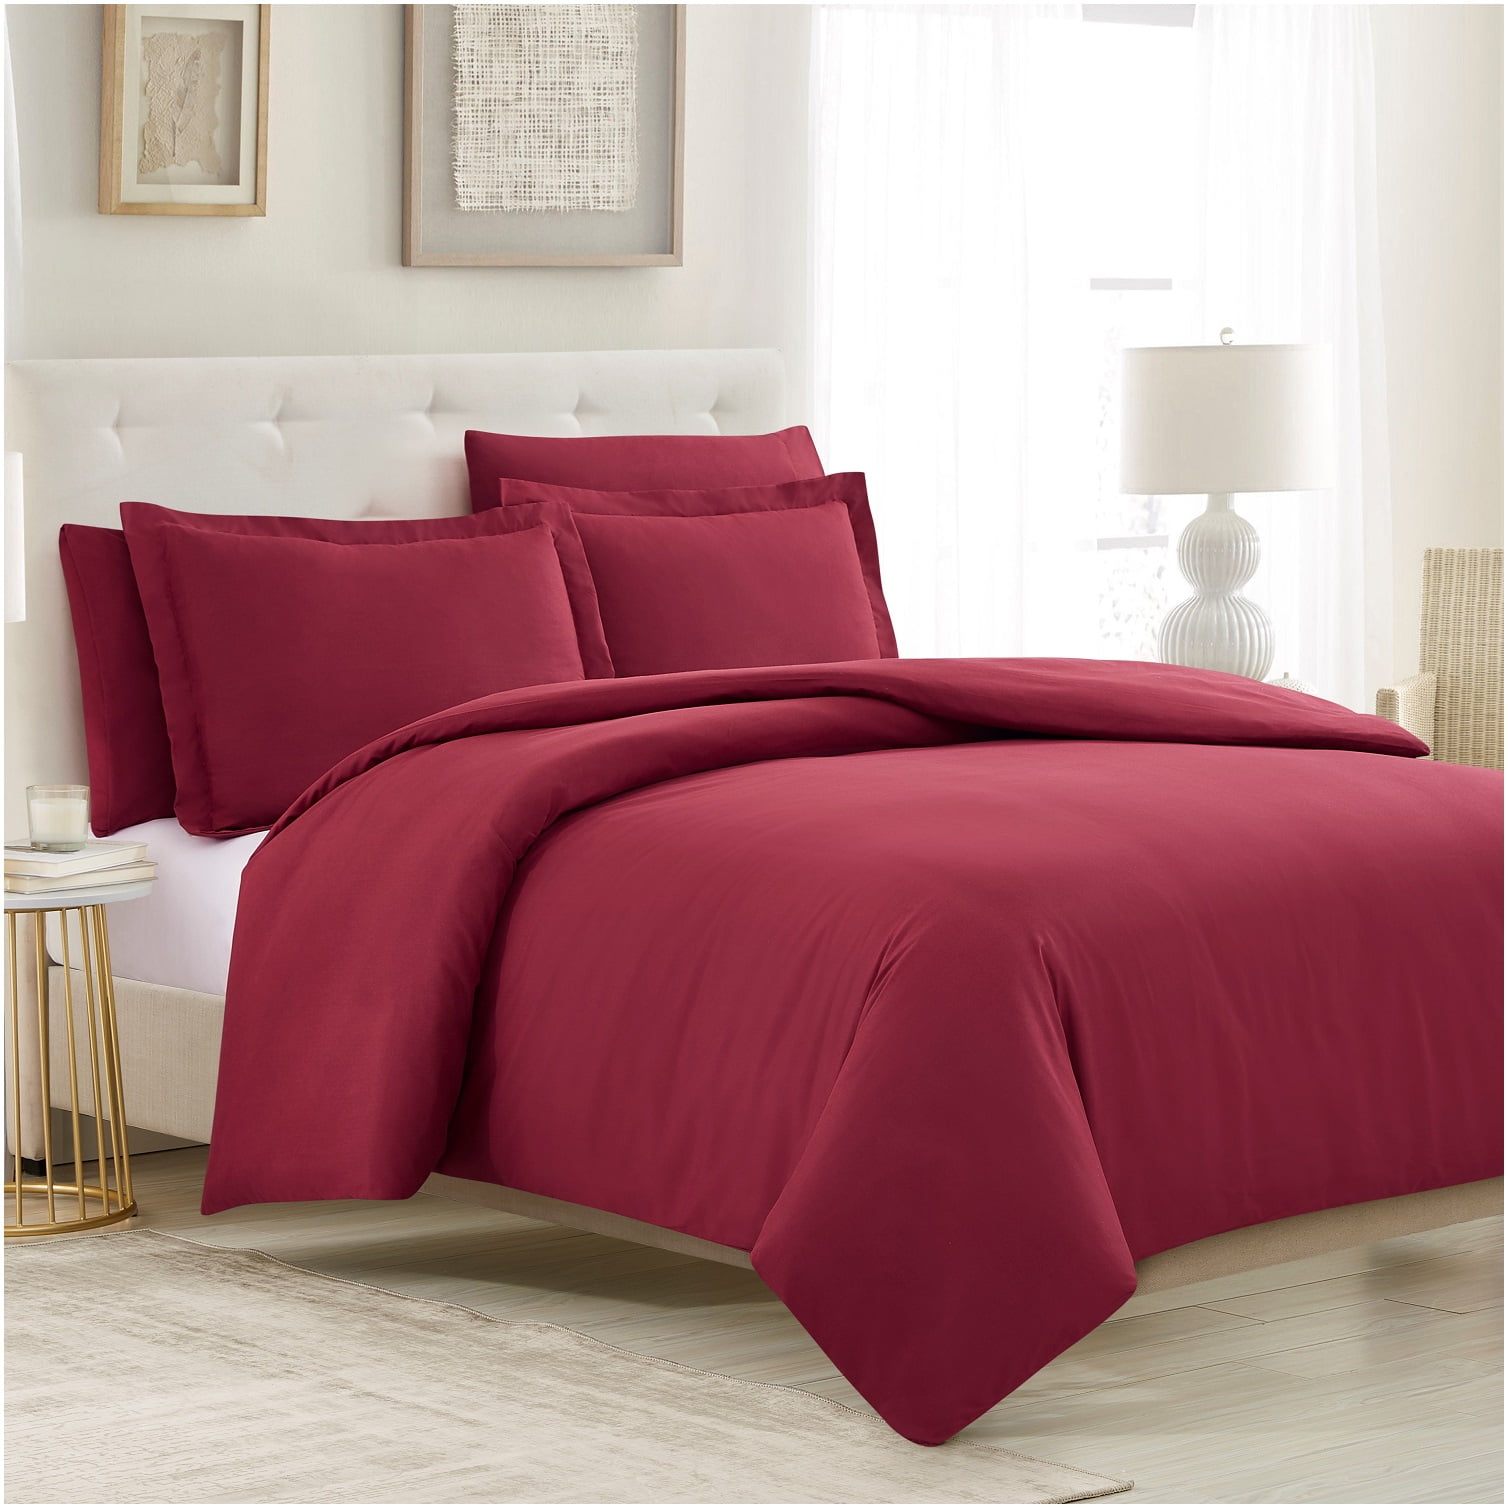 Details about   Royal deluxe 100% organic bamboo bedlinen sets Complete sets Size - Queen 